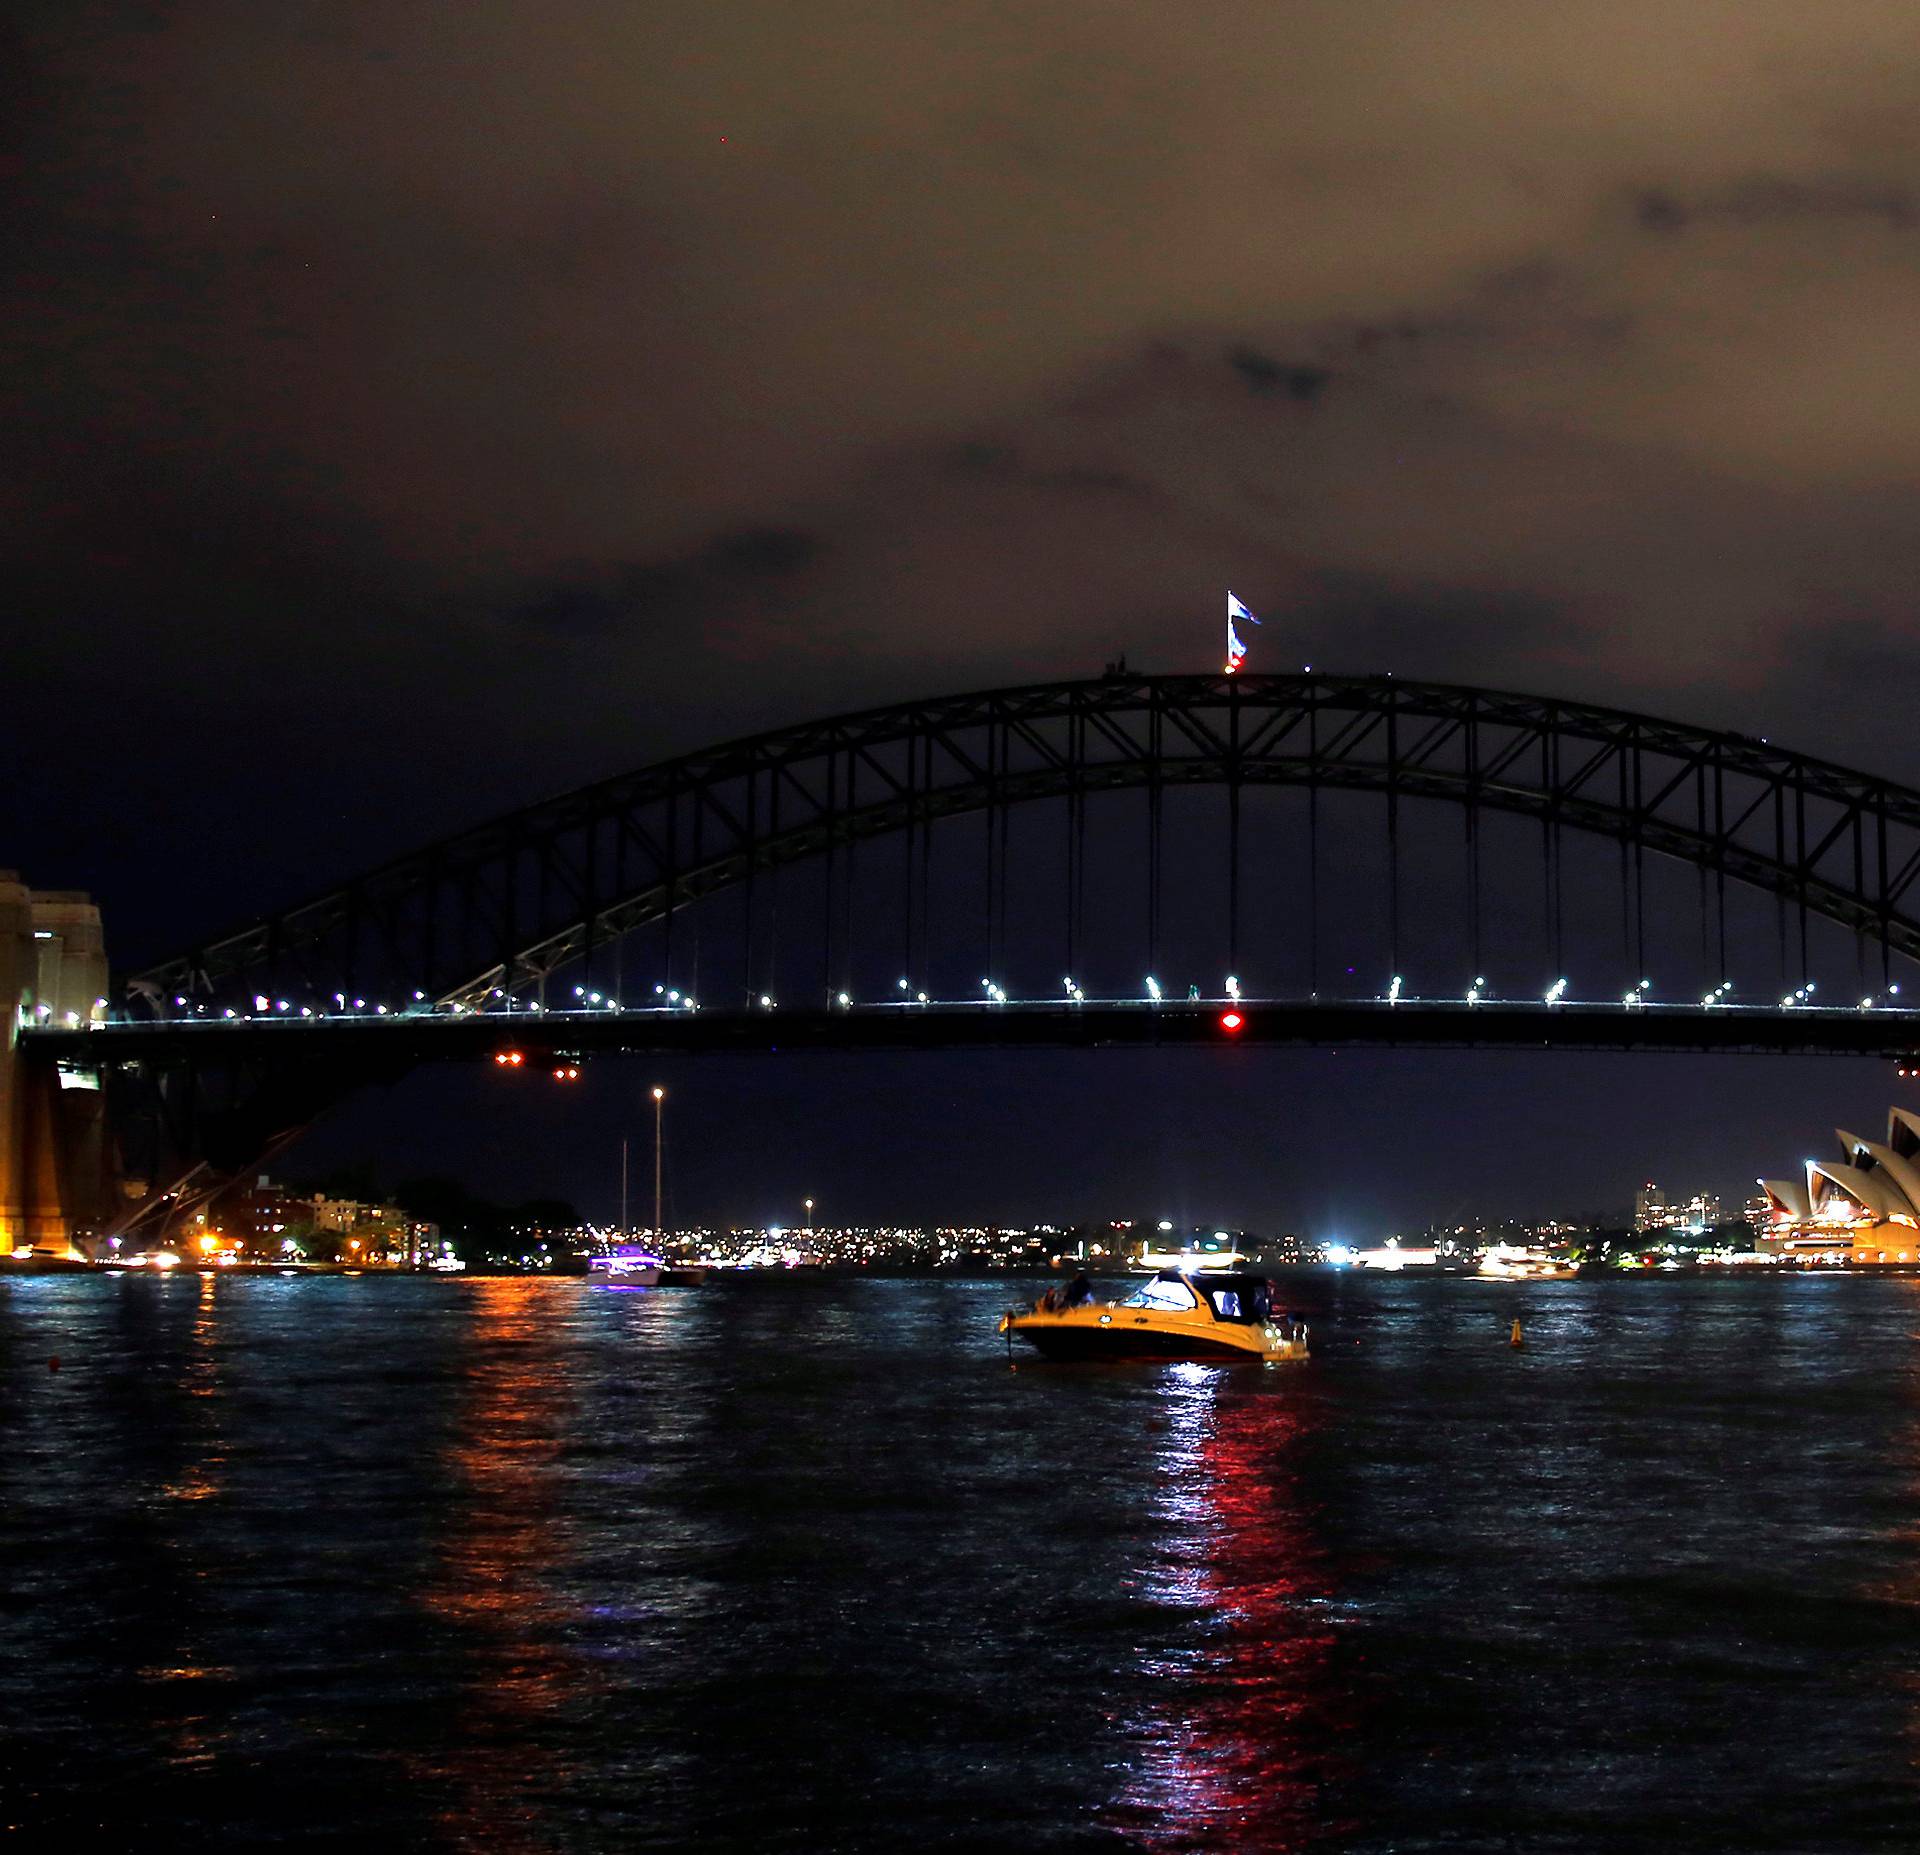 The Sydney Harbour Bridge seen during the tenth anniversary of Earth Hour in Sydney